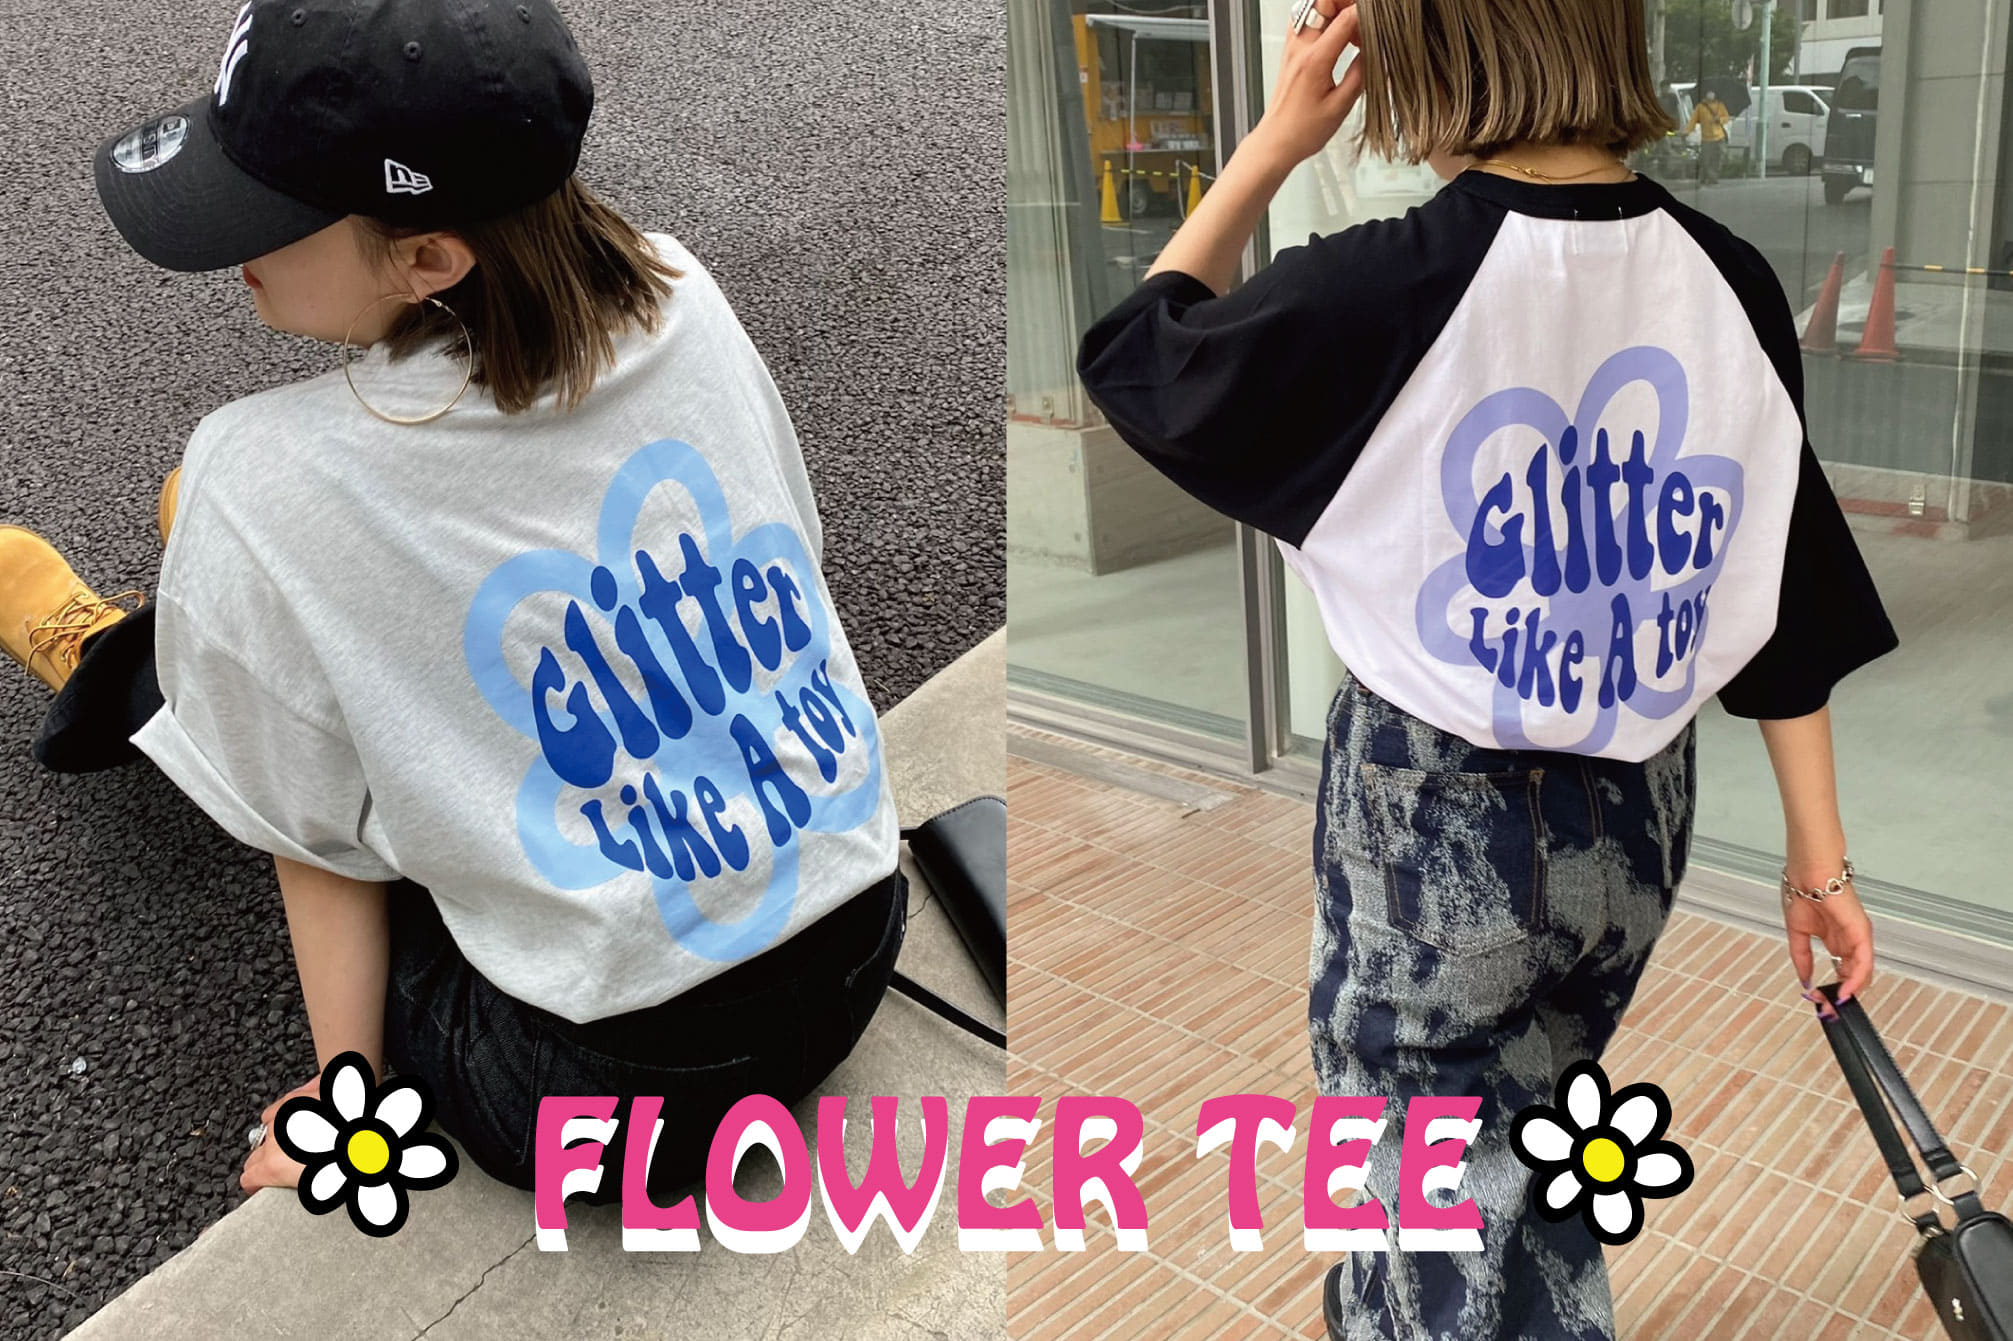 WHO’S WHO gallery 【GLITTE FLOWER TEE】